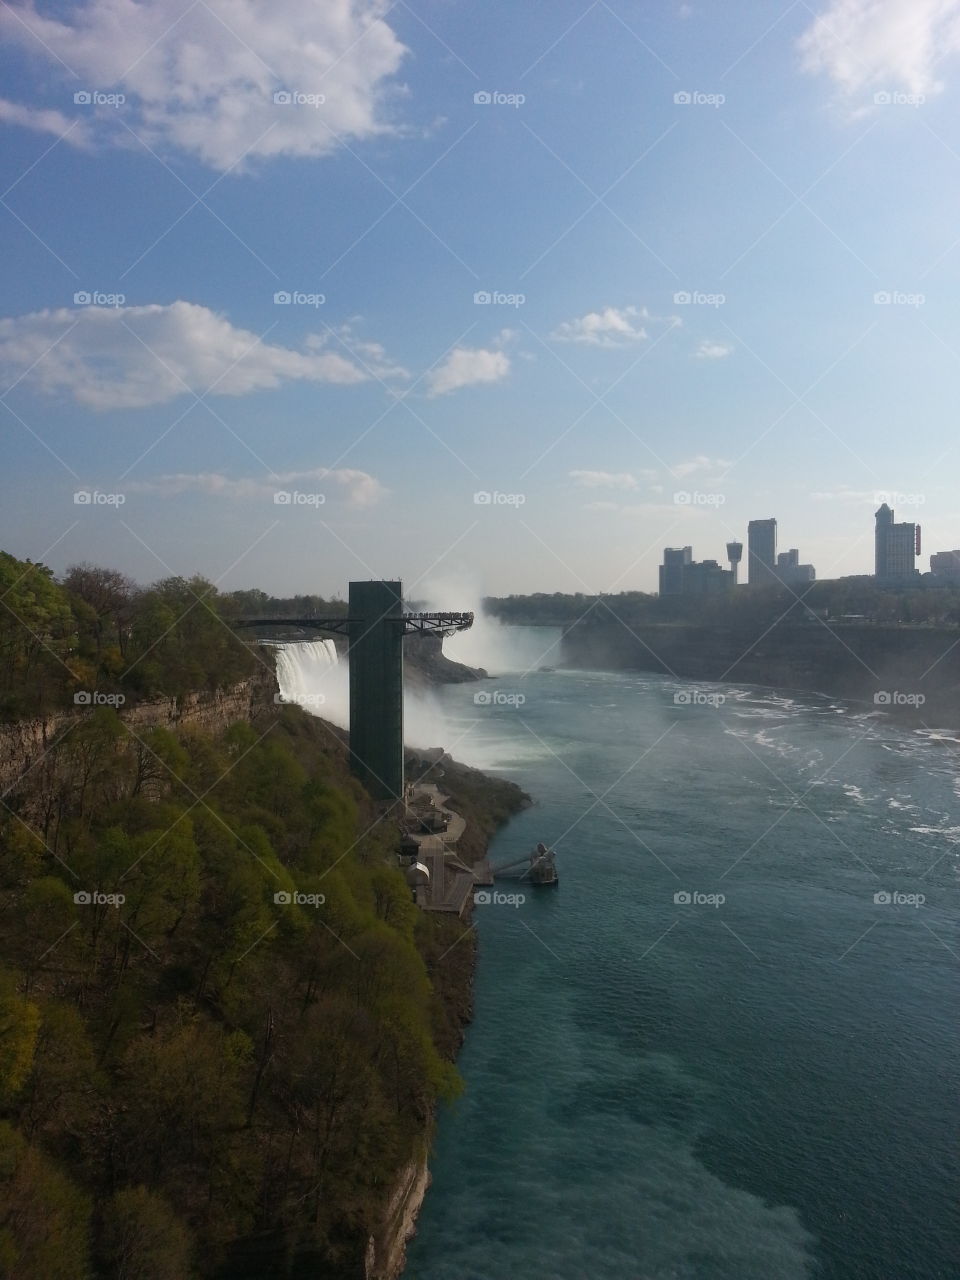 This is taken from the American side of Niagara Falls facing Canada